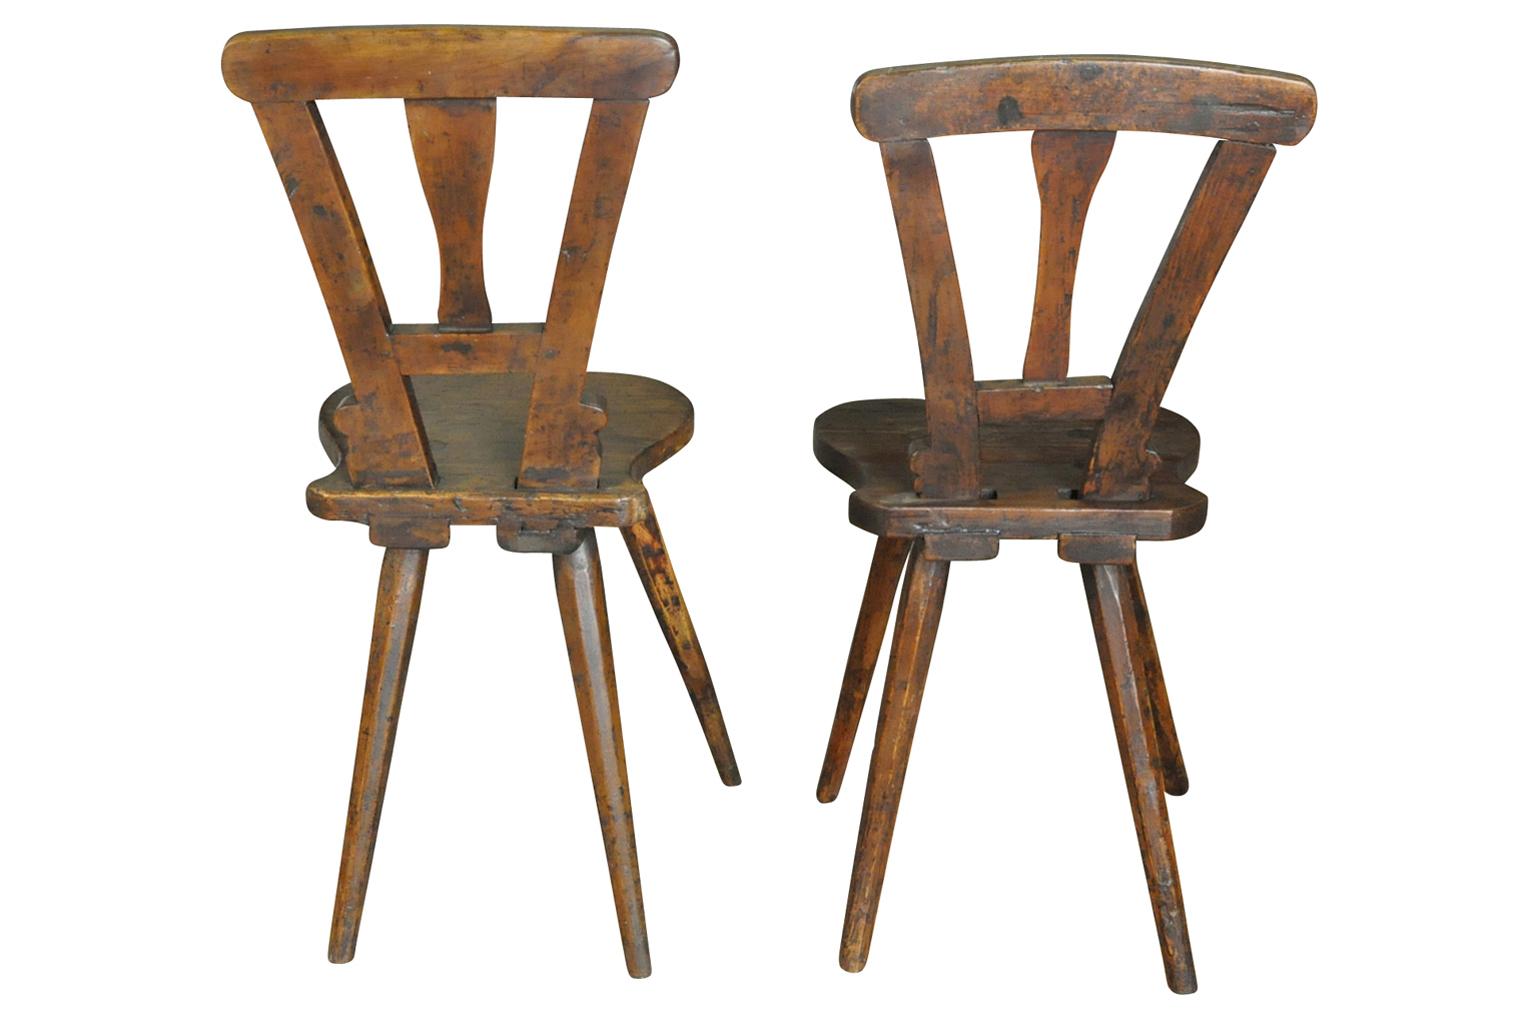 A very charming pair of 19th century diminutive side chairs from the Alsace region of France. Wonderfully constructed from walnut. Very luminous patina. A terrific accent for any casual living area. The chairs vary slightly in dimension. One